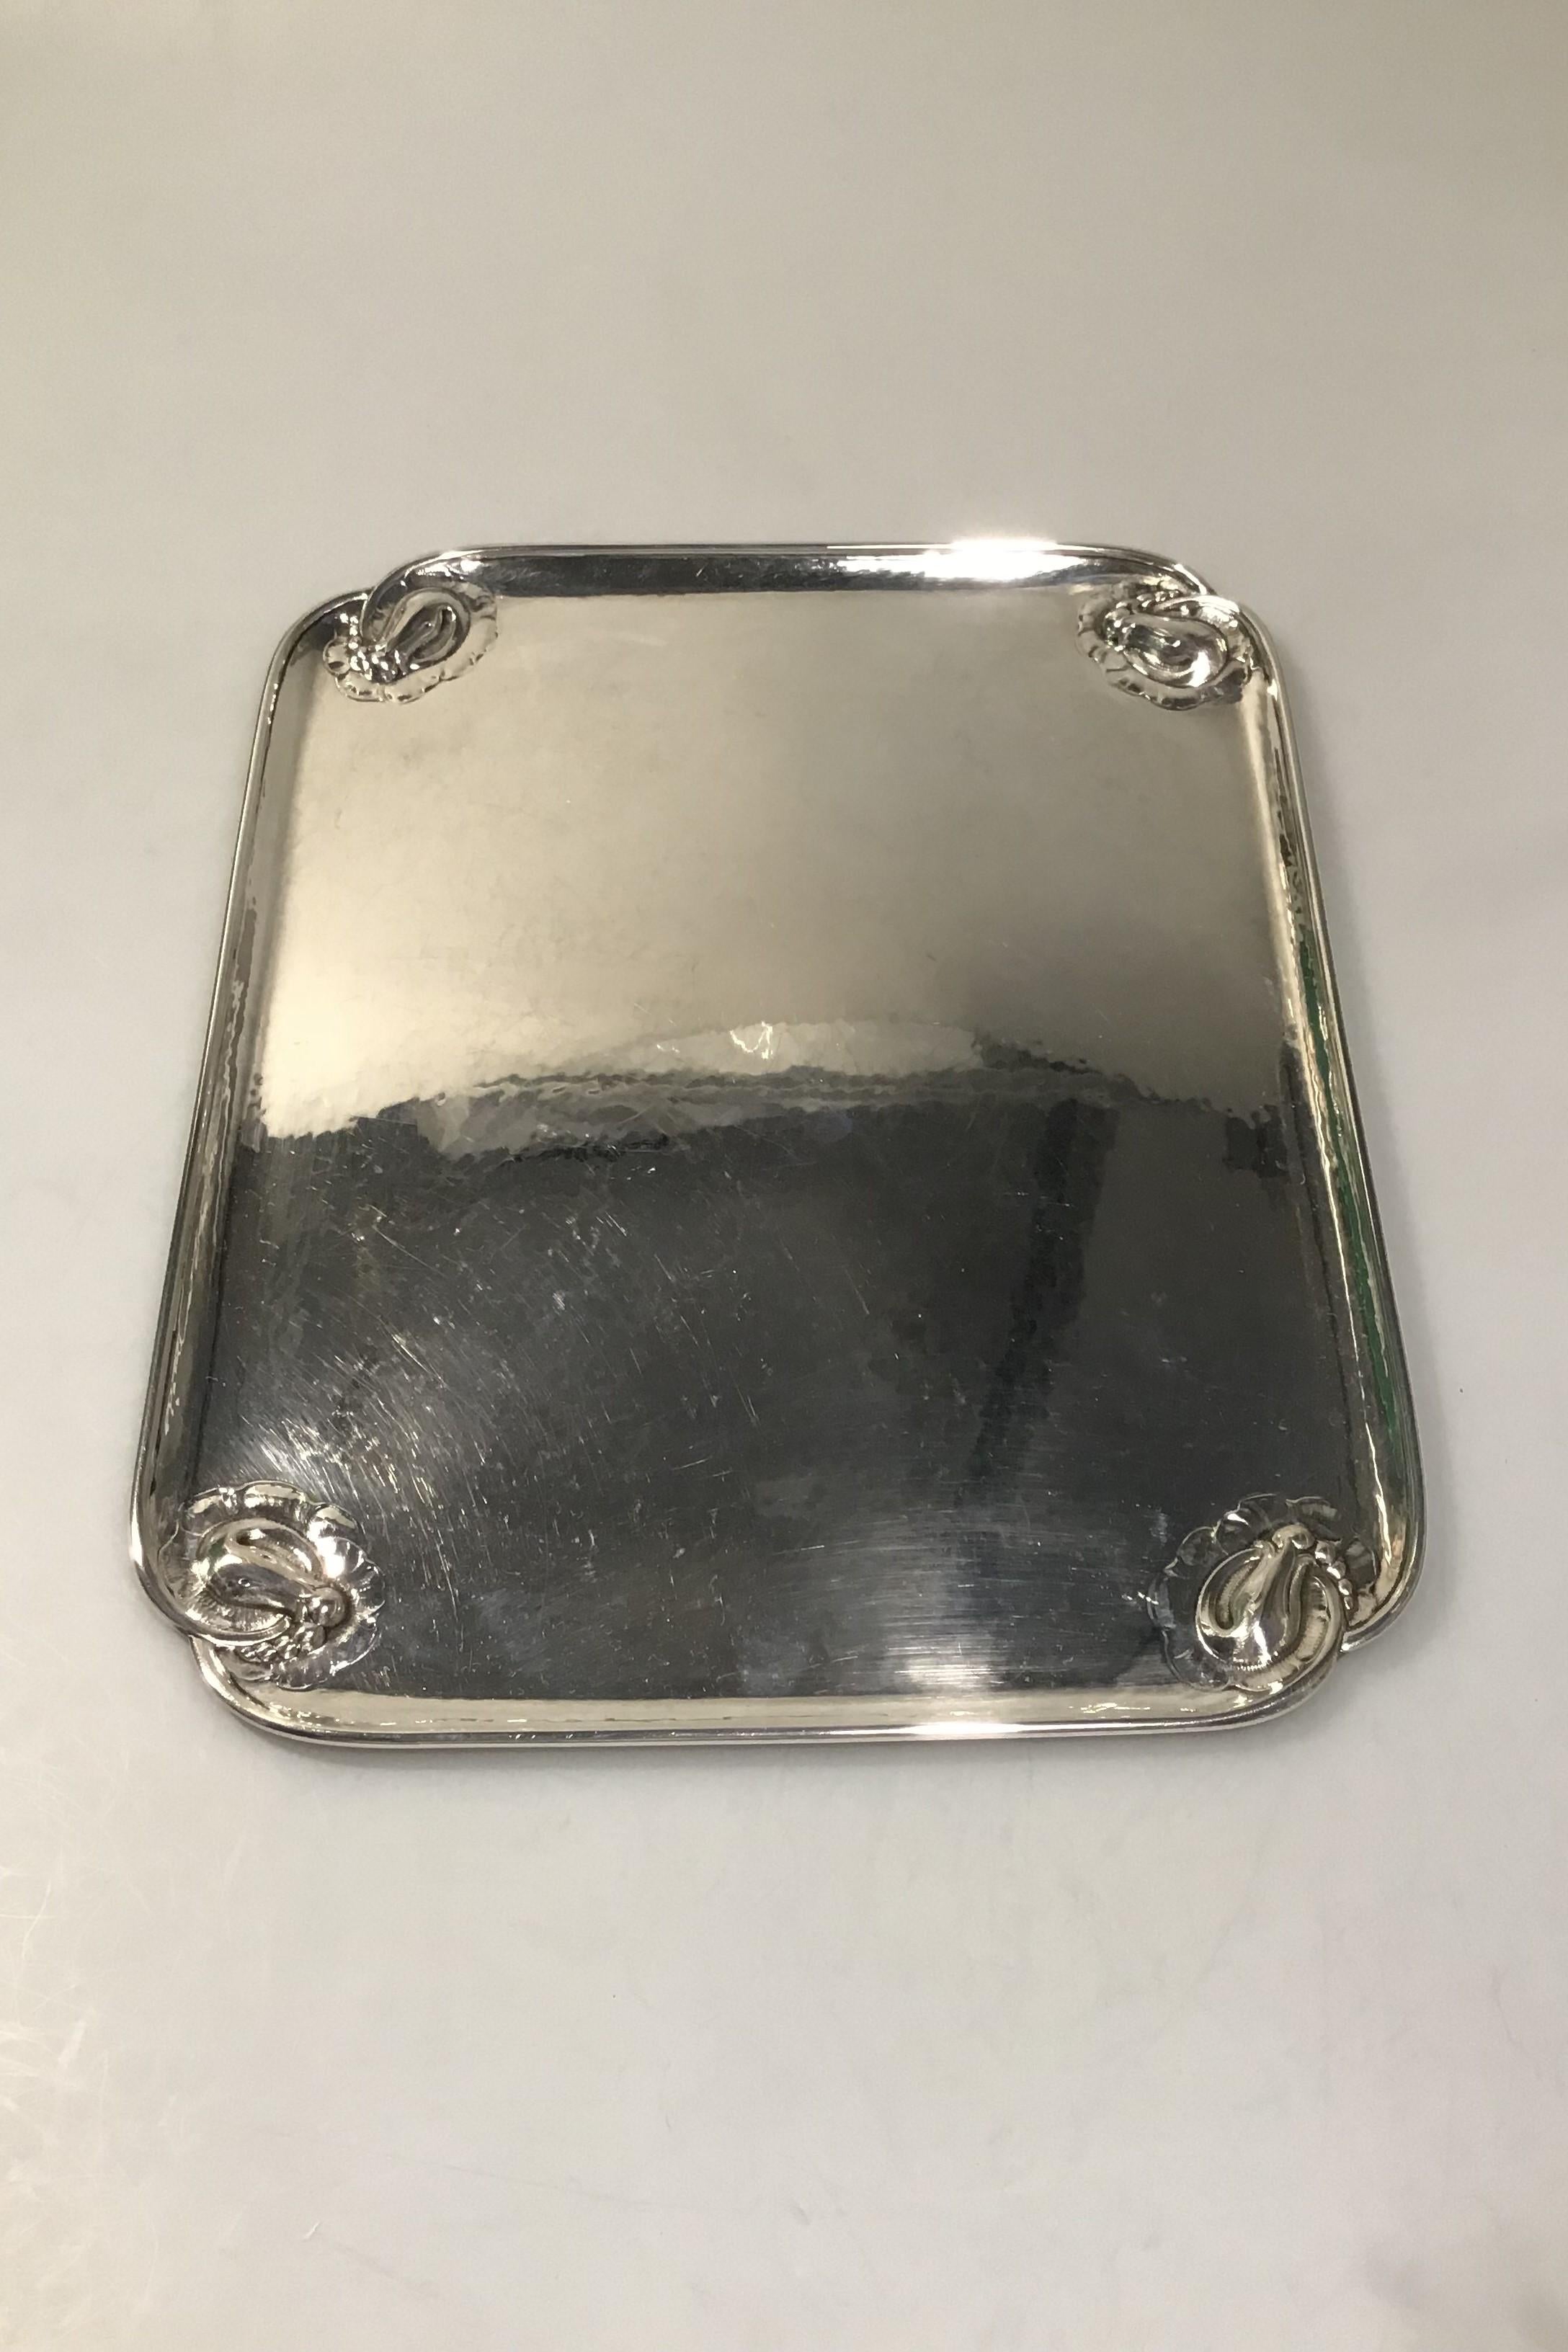 Georg Jensen sterling silver silver blossom tray no 2B 
Rectangular serving tray 
Measures 28 cm x 35 cm/11.02